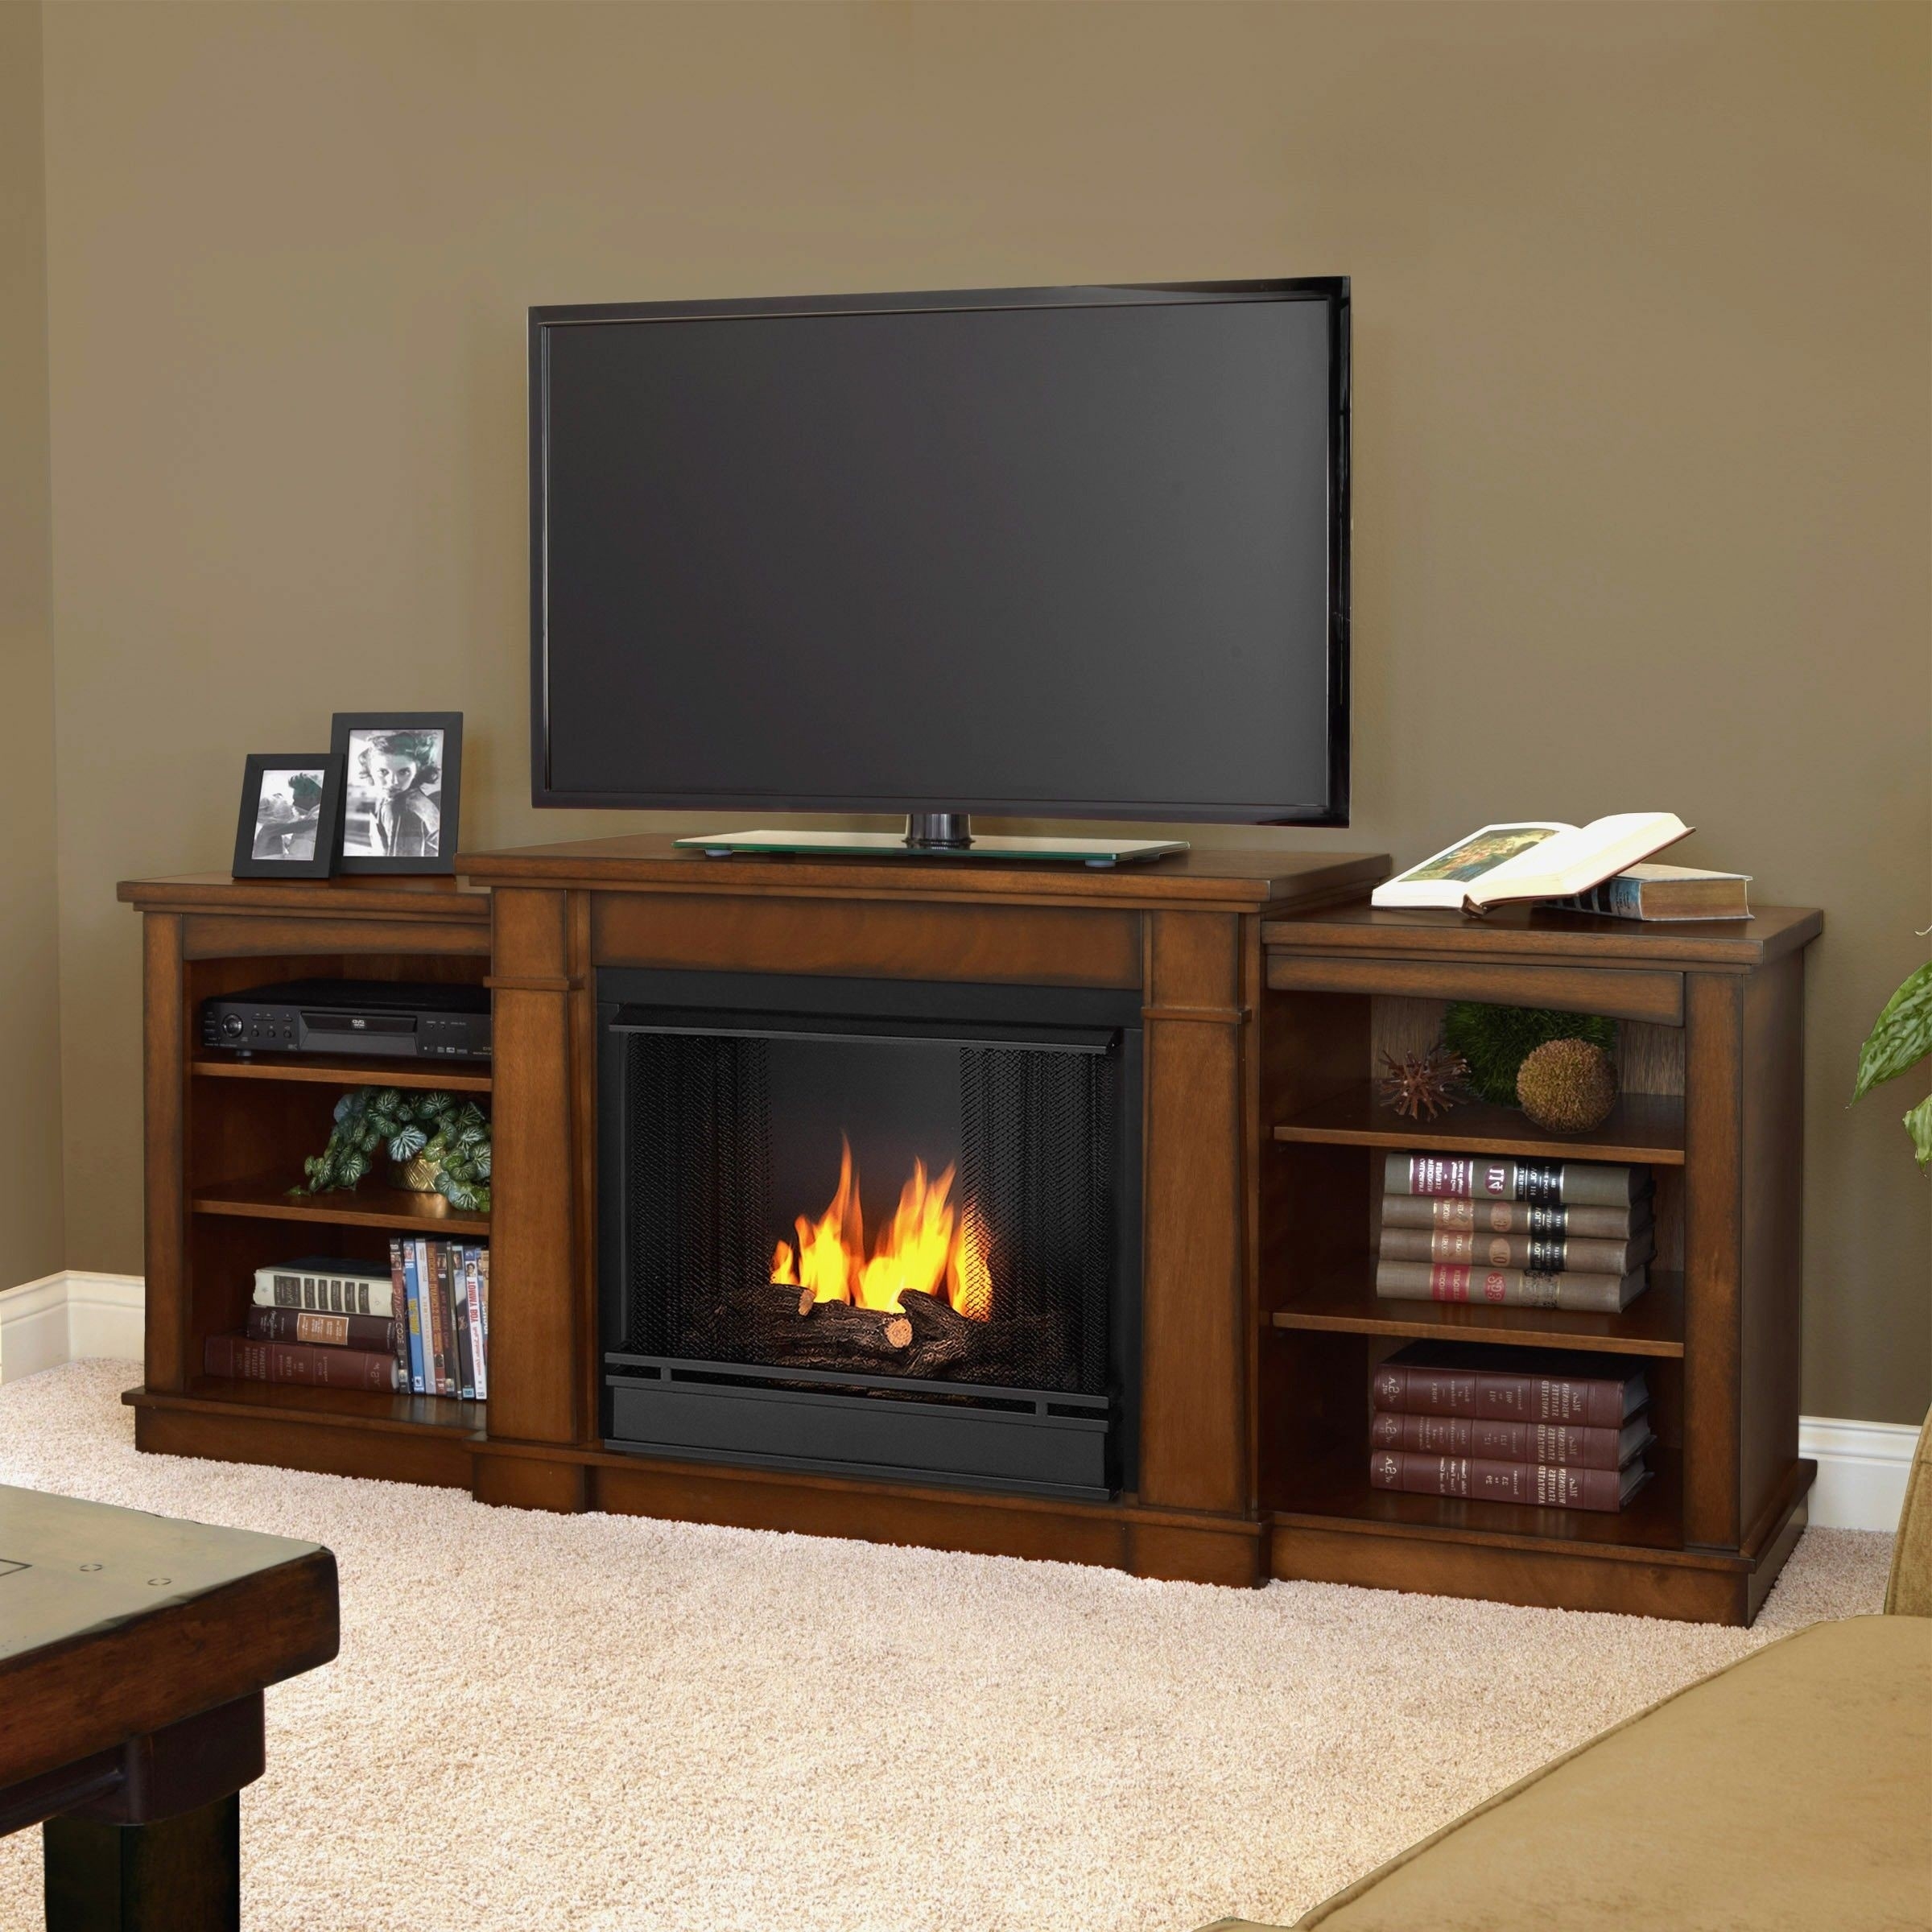 Fireplace Tv Stands For Flat Screens - Ideas on Foter